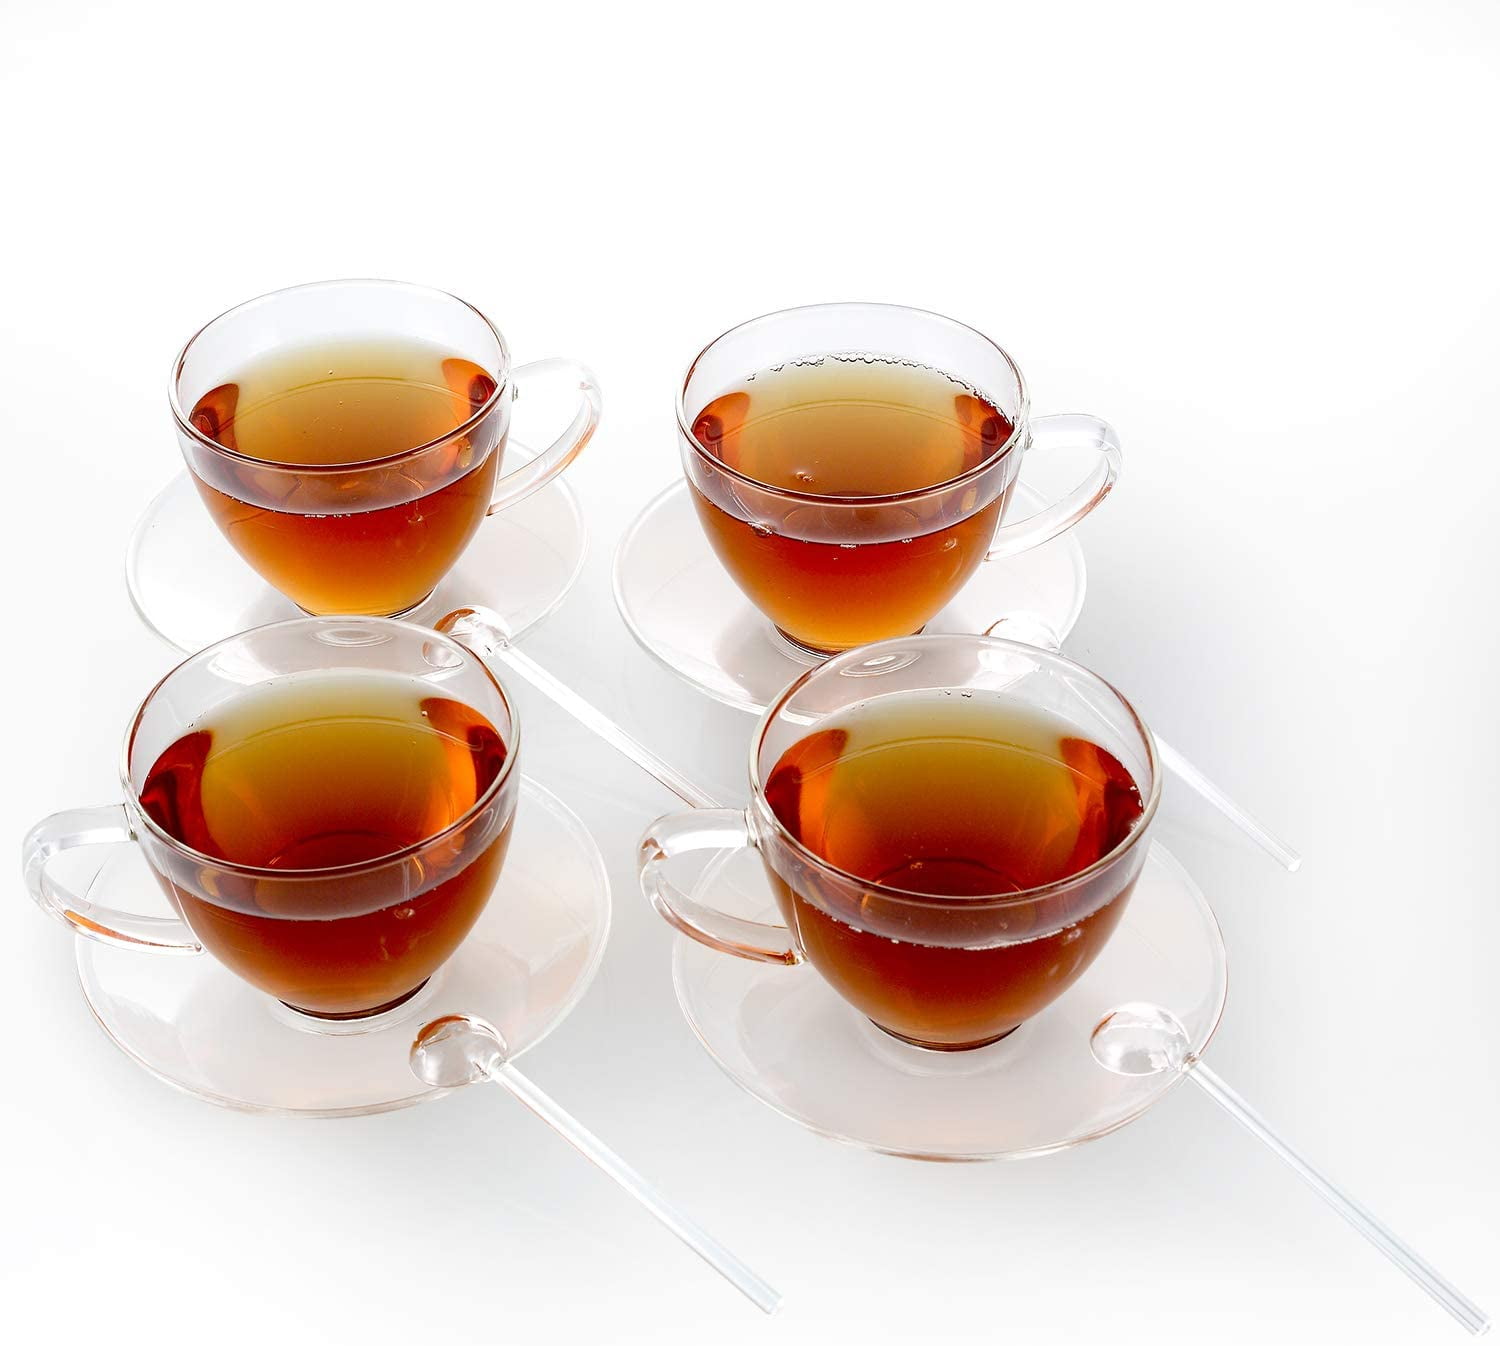 Dishwasher Safe – Glass Espresso or Tea Stirrers Heat-Resistant and Toxin-Free Borosilicate Glass Teabloom Small Glass Teaspoons Set of Two Crystal Clear Petite Teaspoons 5.3 inches